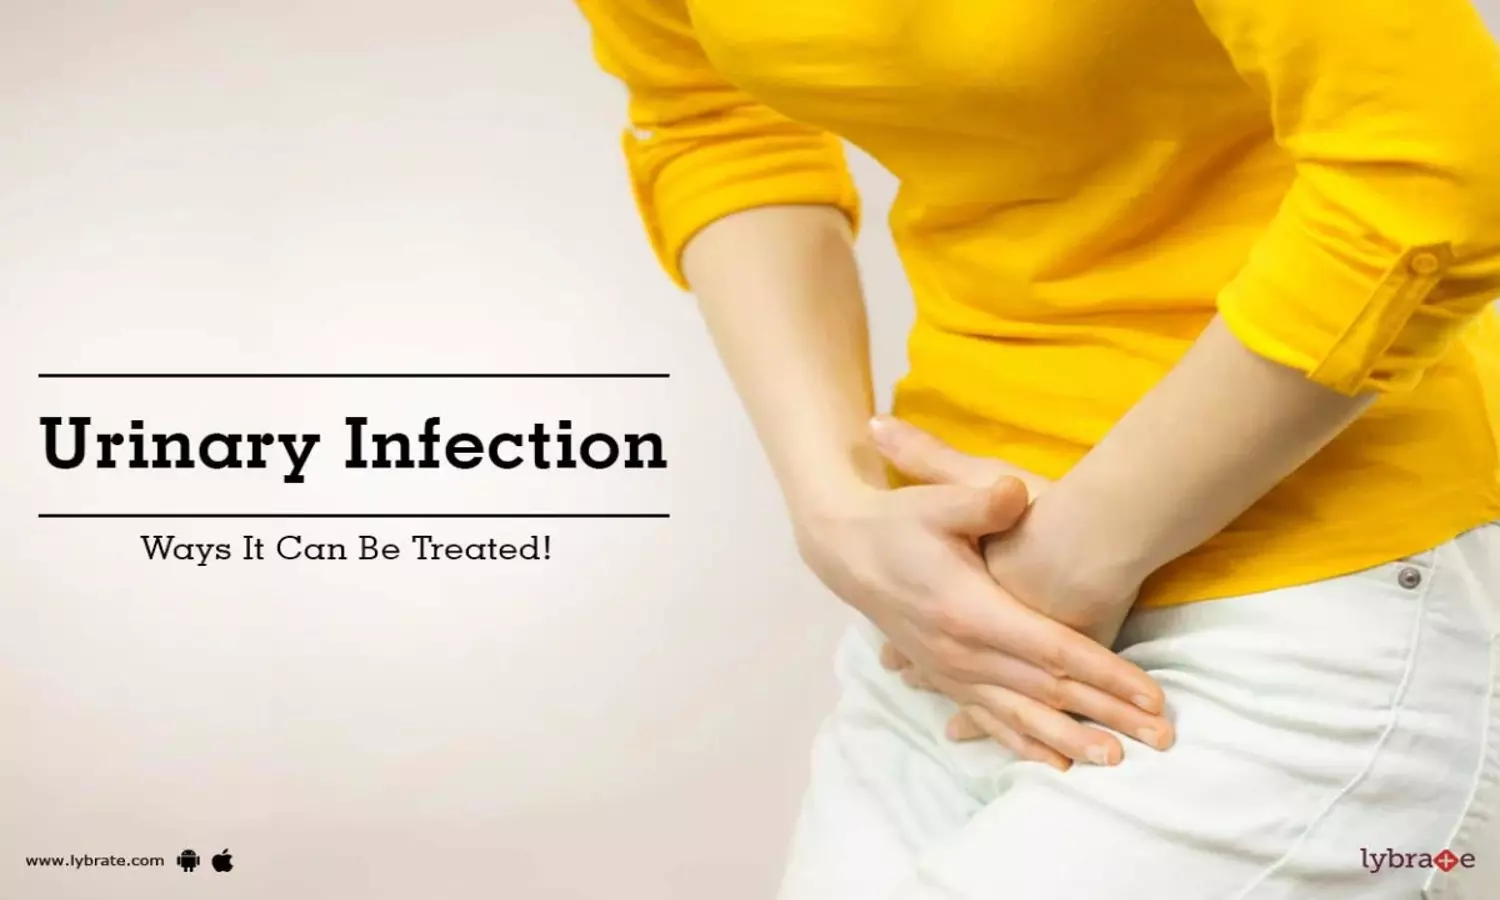 urinary Infection